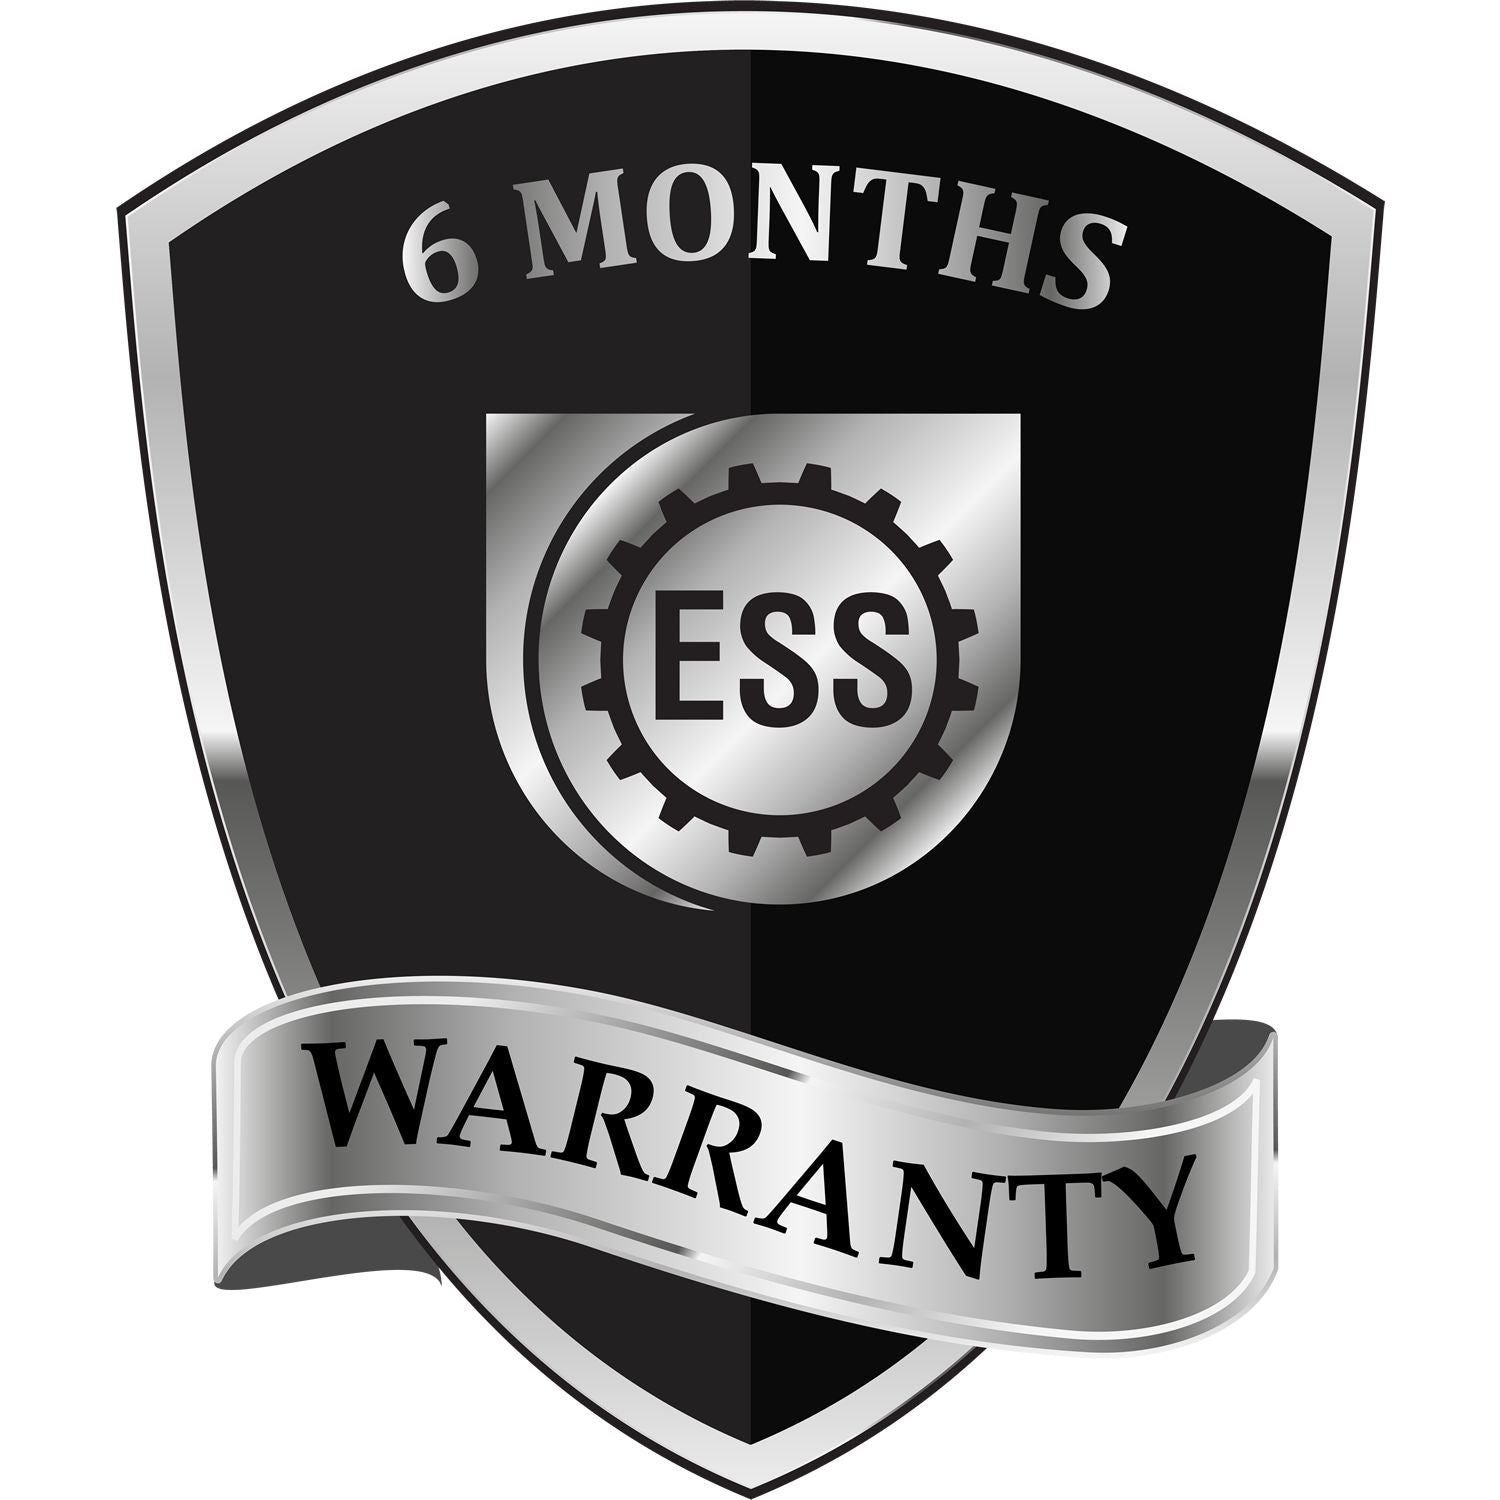 A badge or emblem showing a warranty icon for the Oklahoma Professional Engineer Seal Stamp